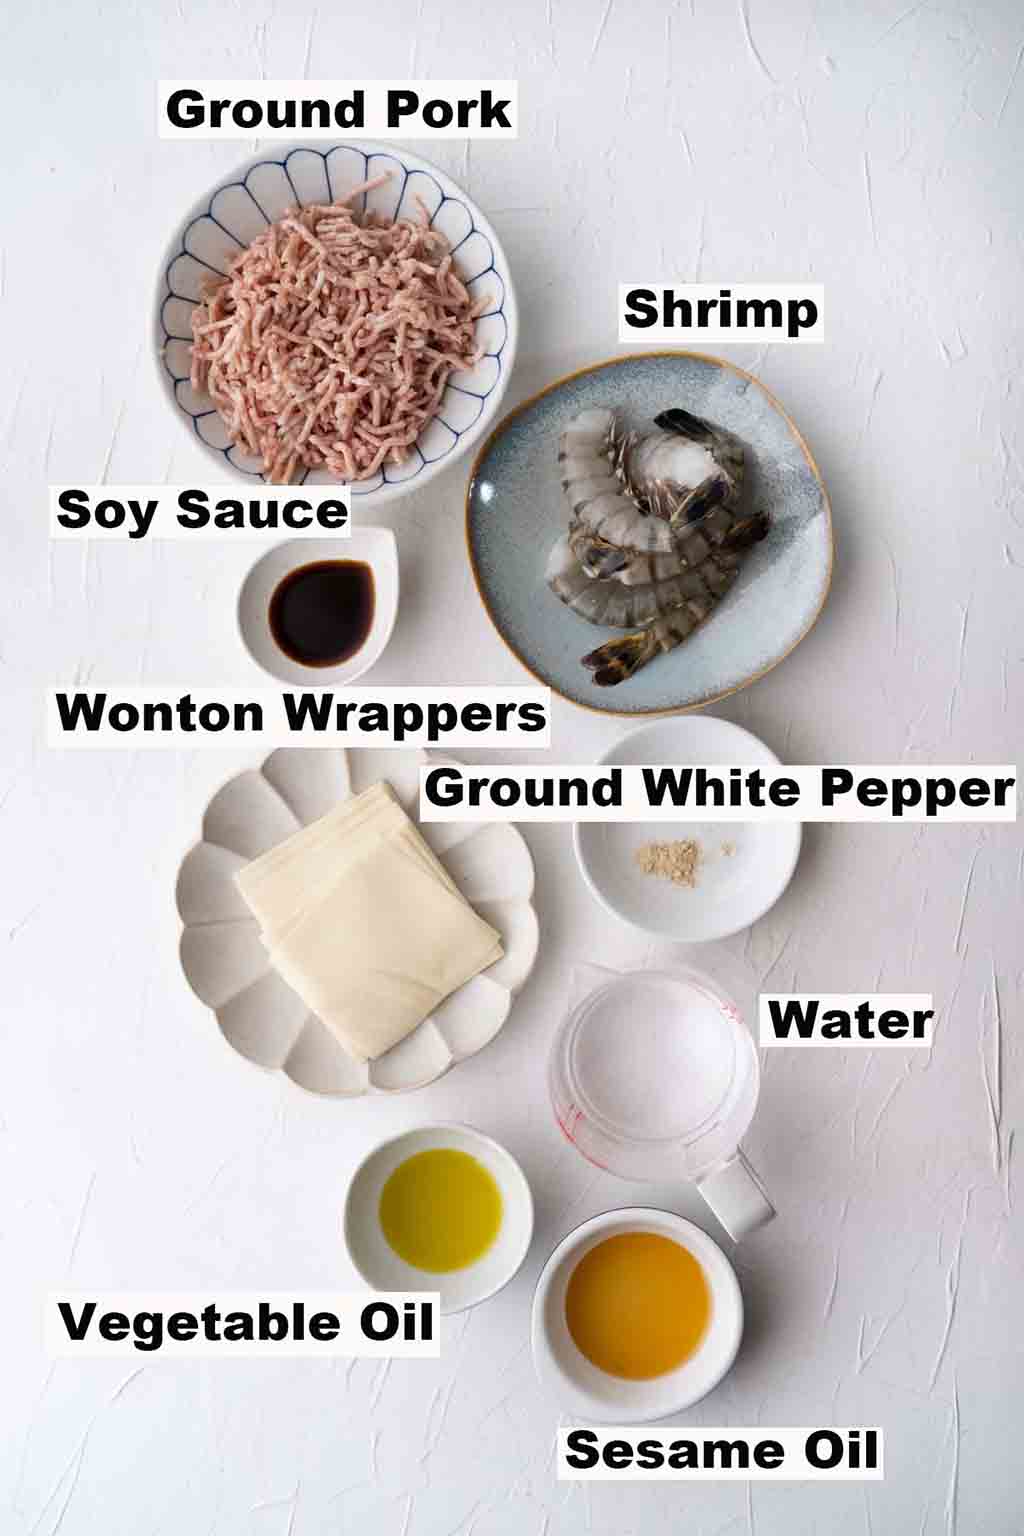 Ingredients for fried wontons such as ground pork, shrimp, soy sauce, wonton wrappers, ground white pepper, water, vegetable oil and sesame oil.